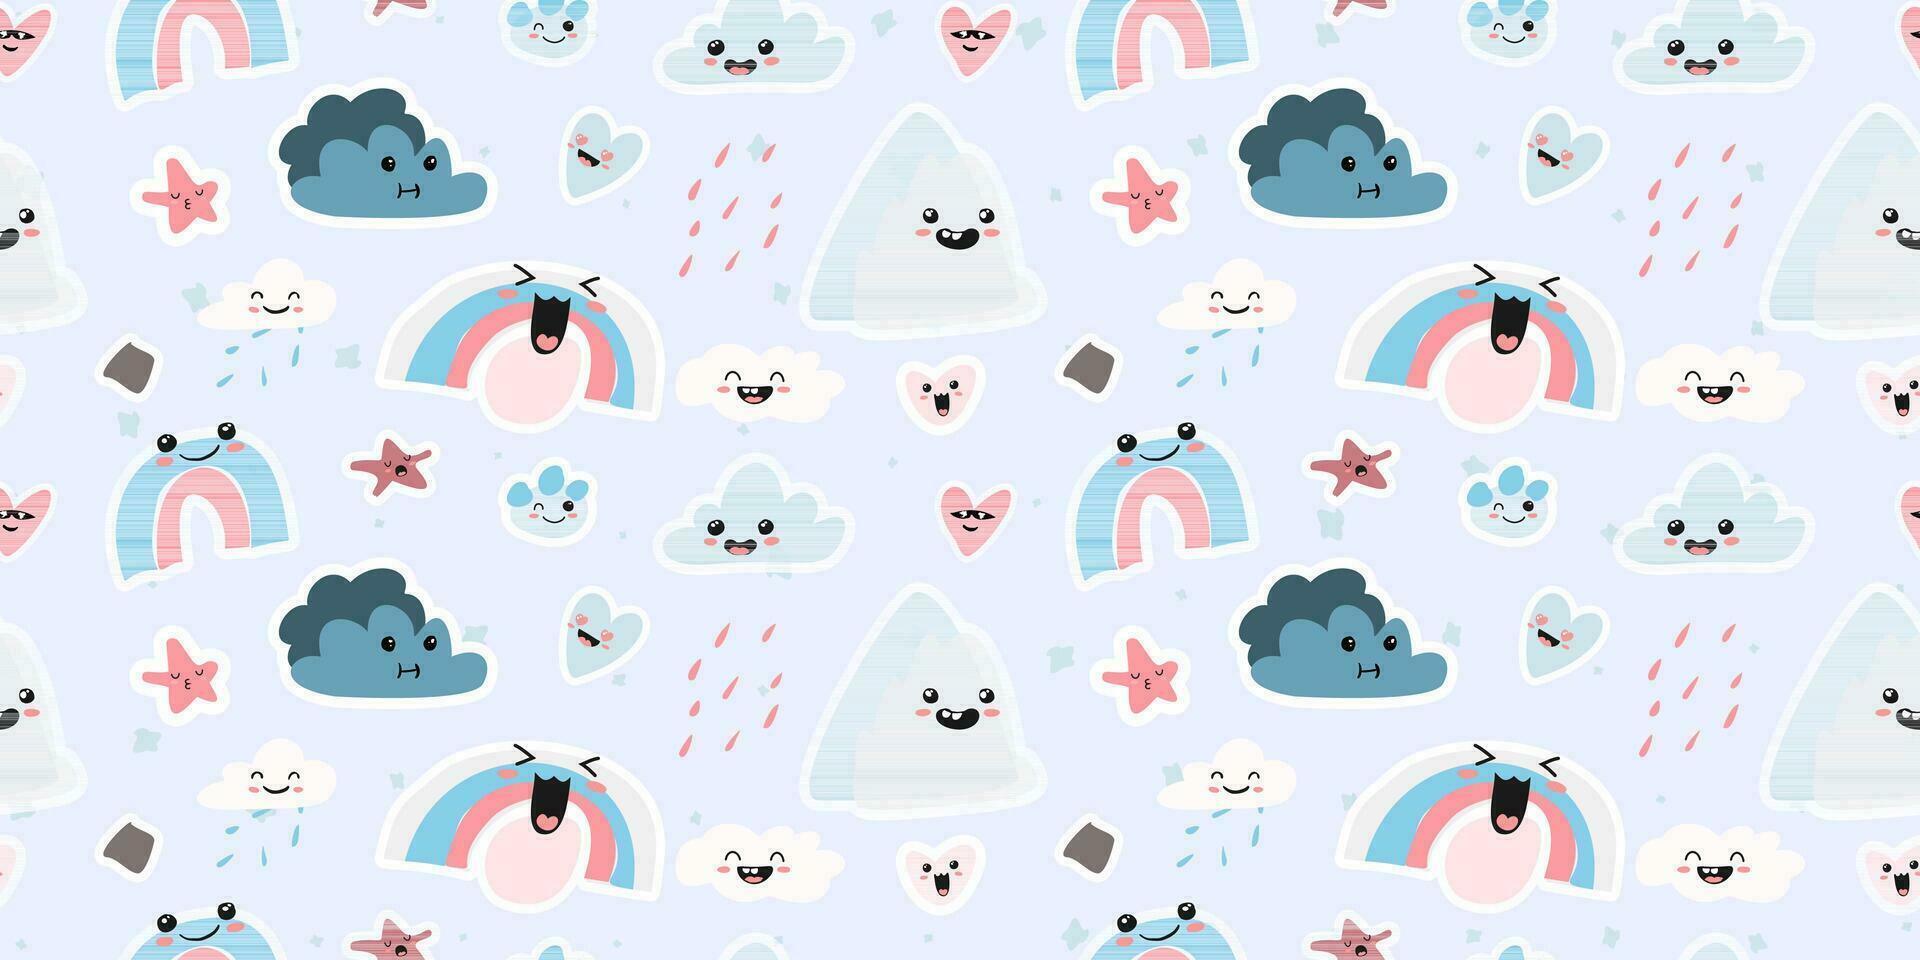 Nordic Forest Theme Minimalist Scandinavian Patterns with Rainbows and Toadstools for Nursery Prints vector